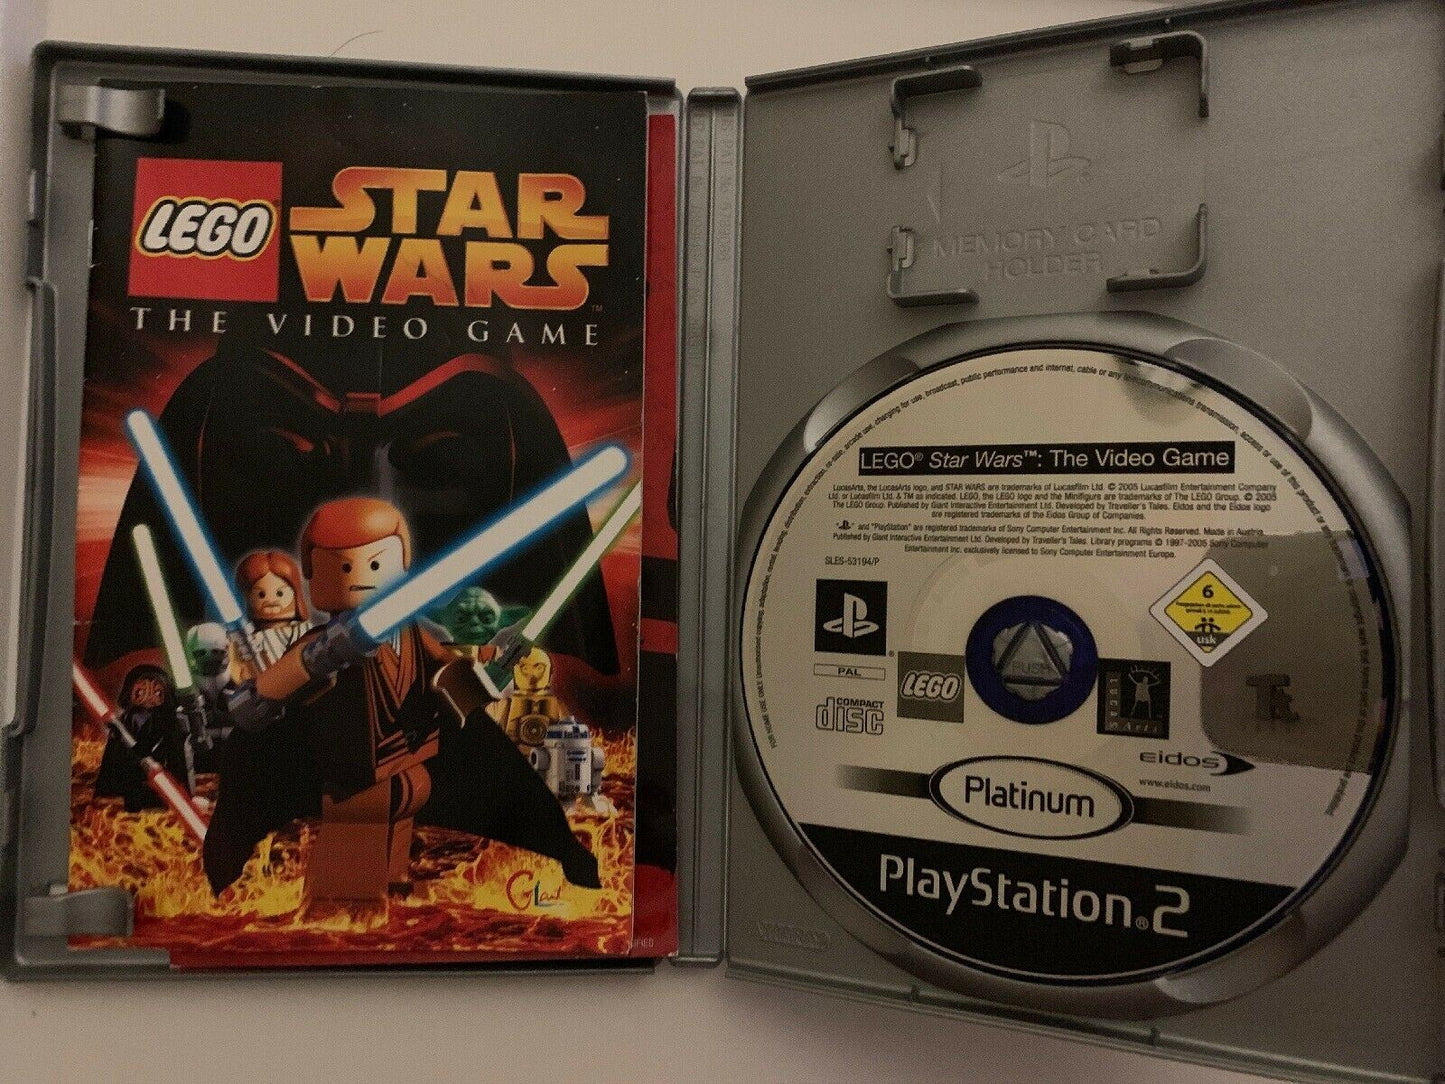 Lego Star Wars The Video Game PS2 (Platinum) PAL *Complete* with Manual